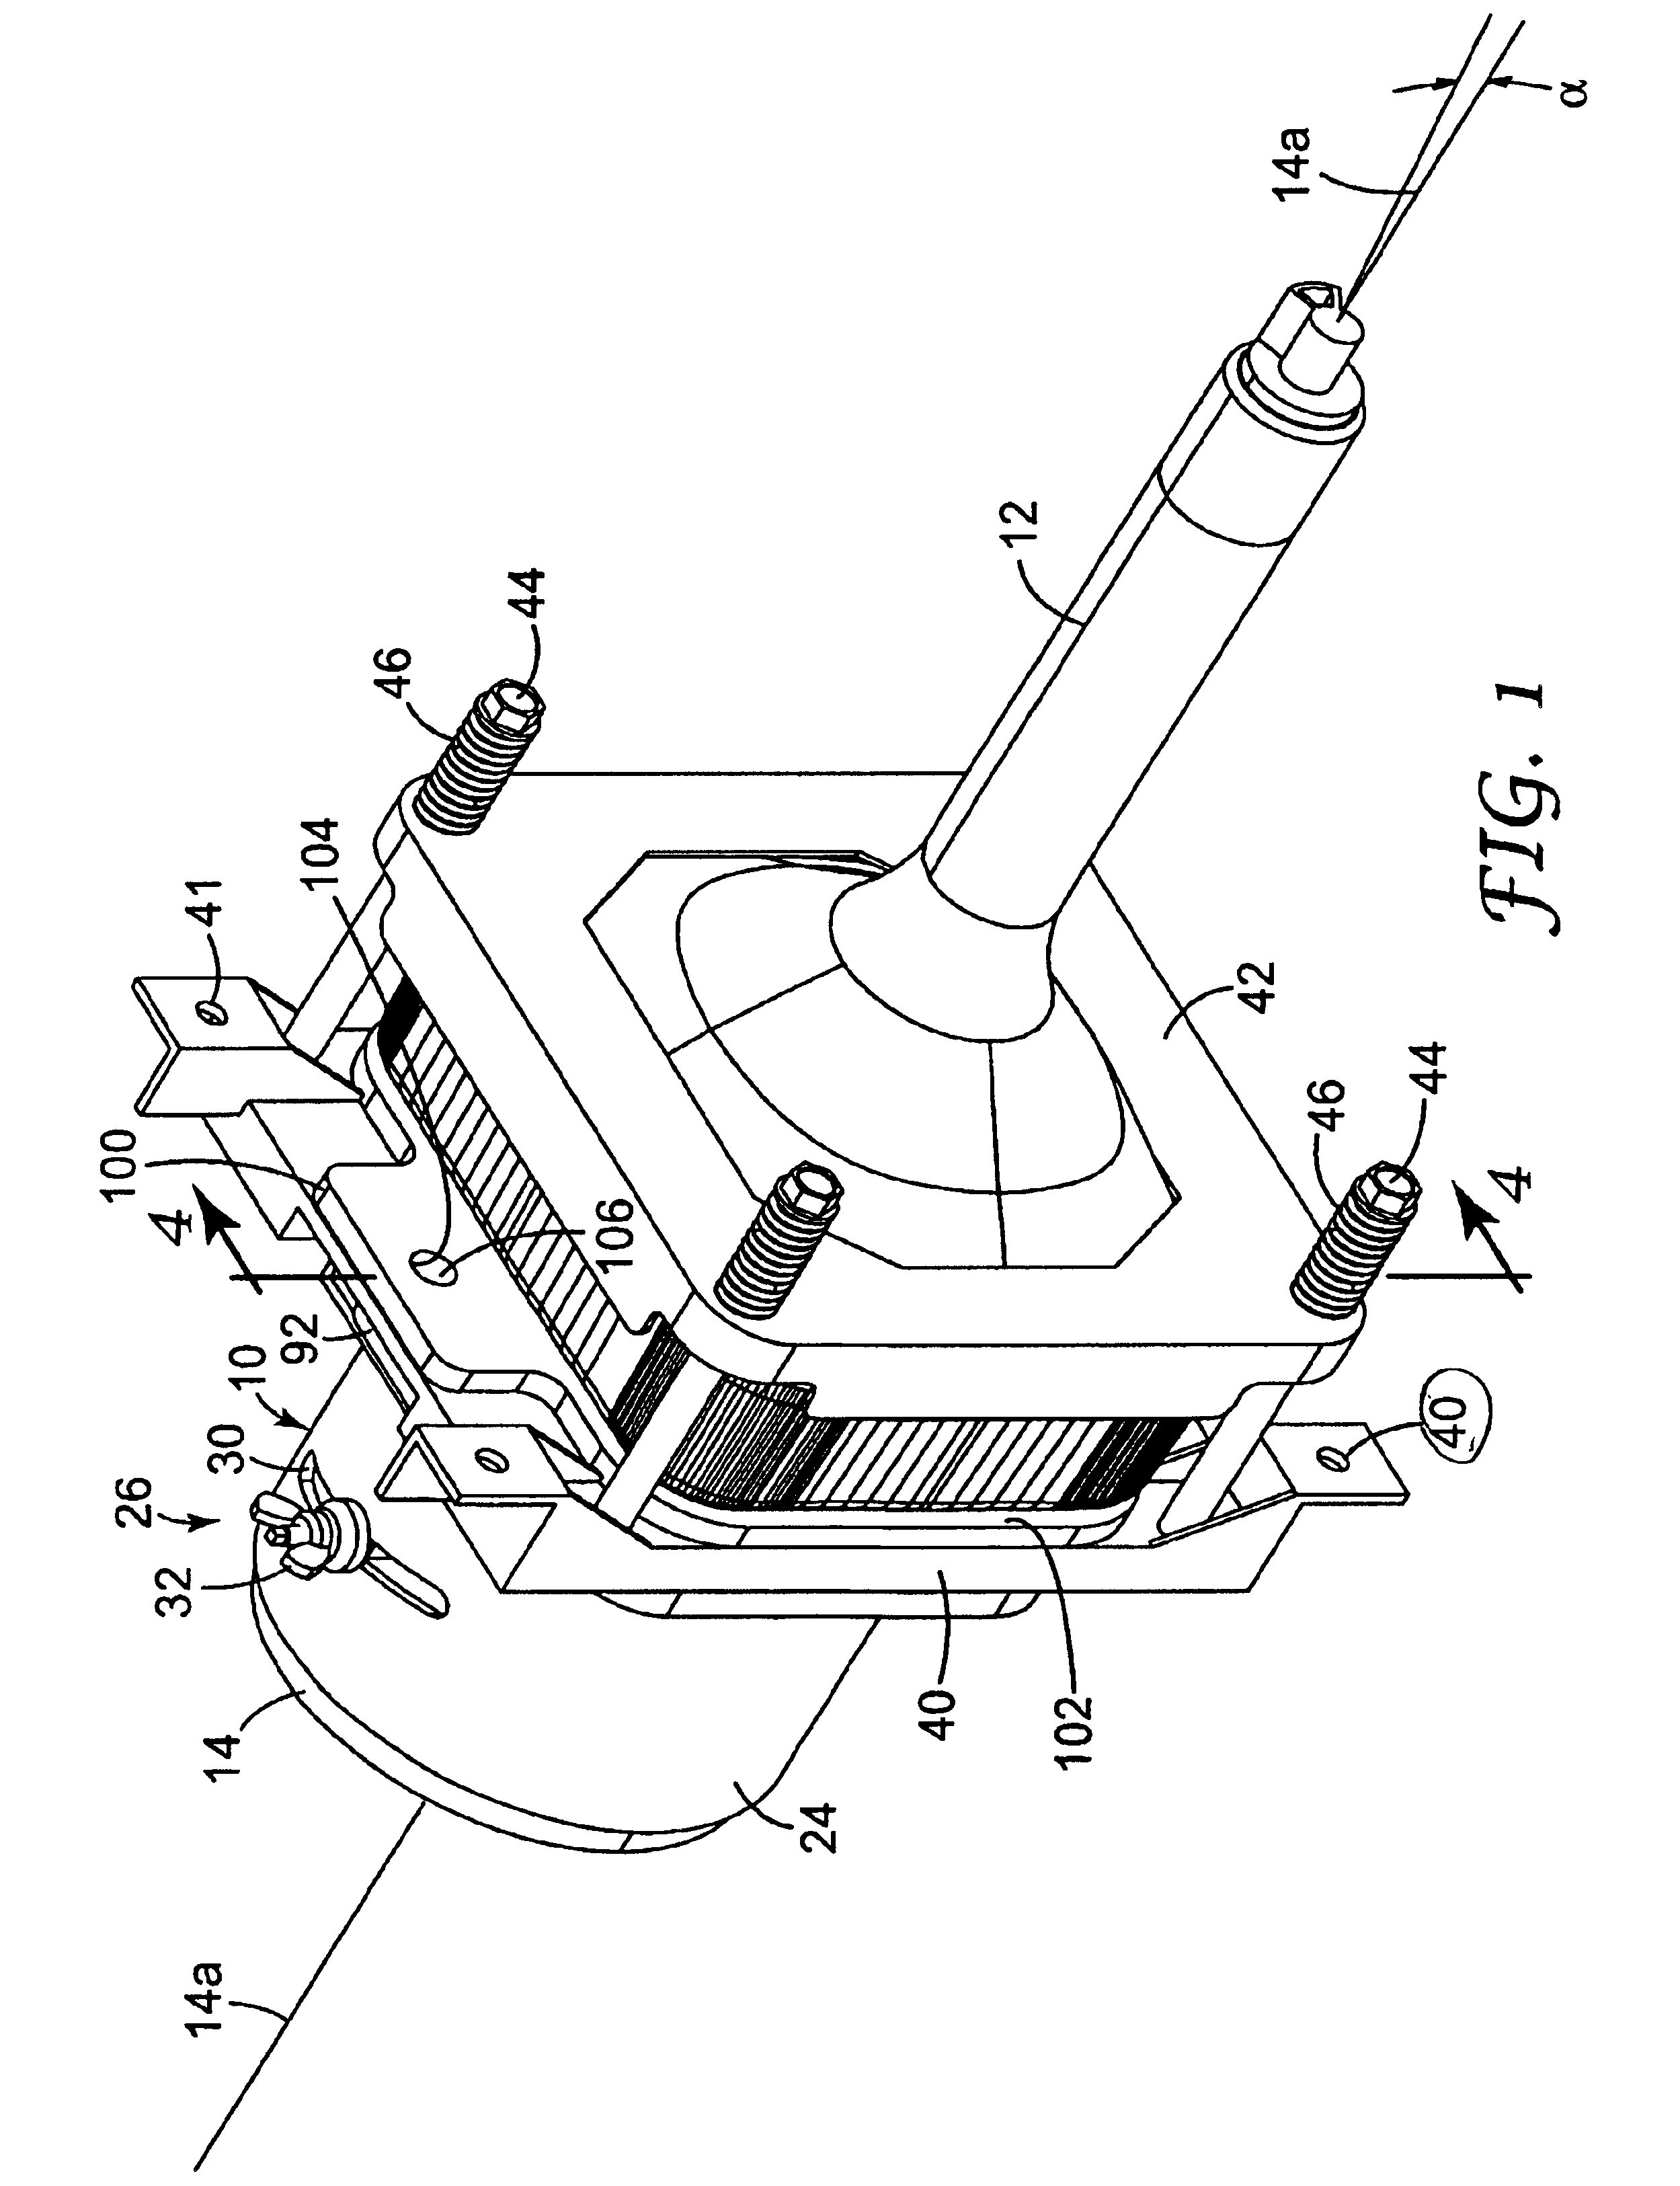 Lens assembly with integrated focus mount and CRT coupler